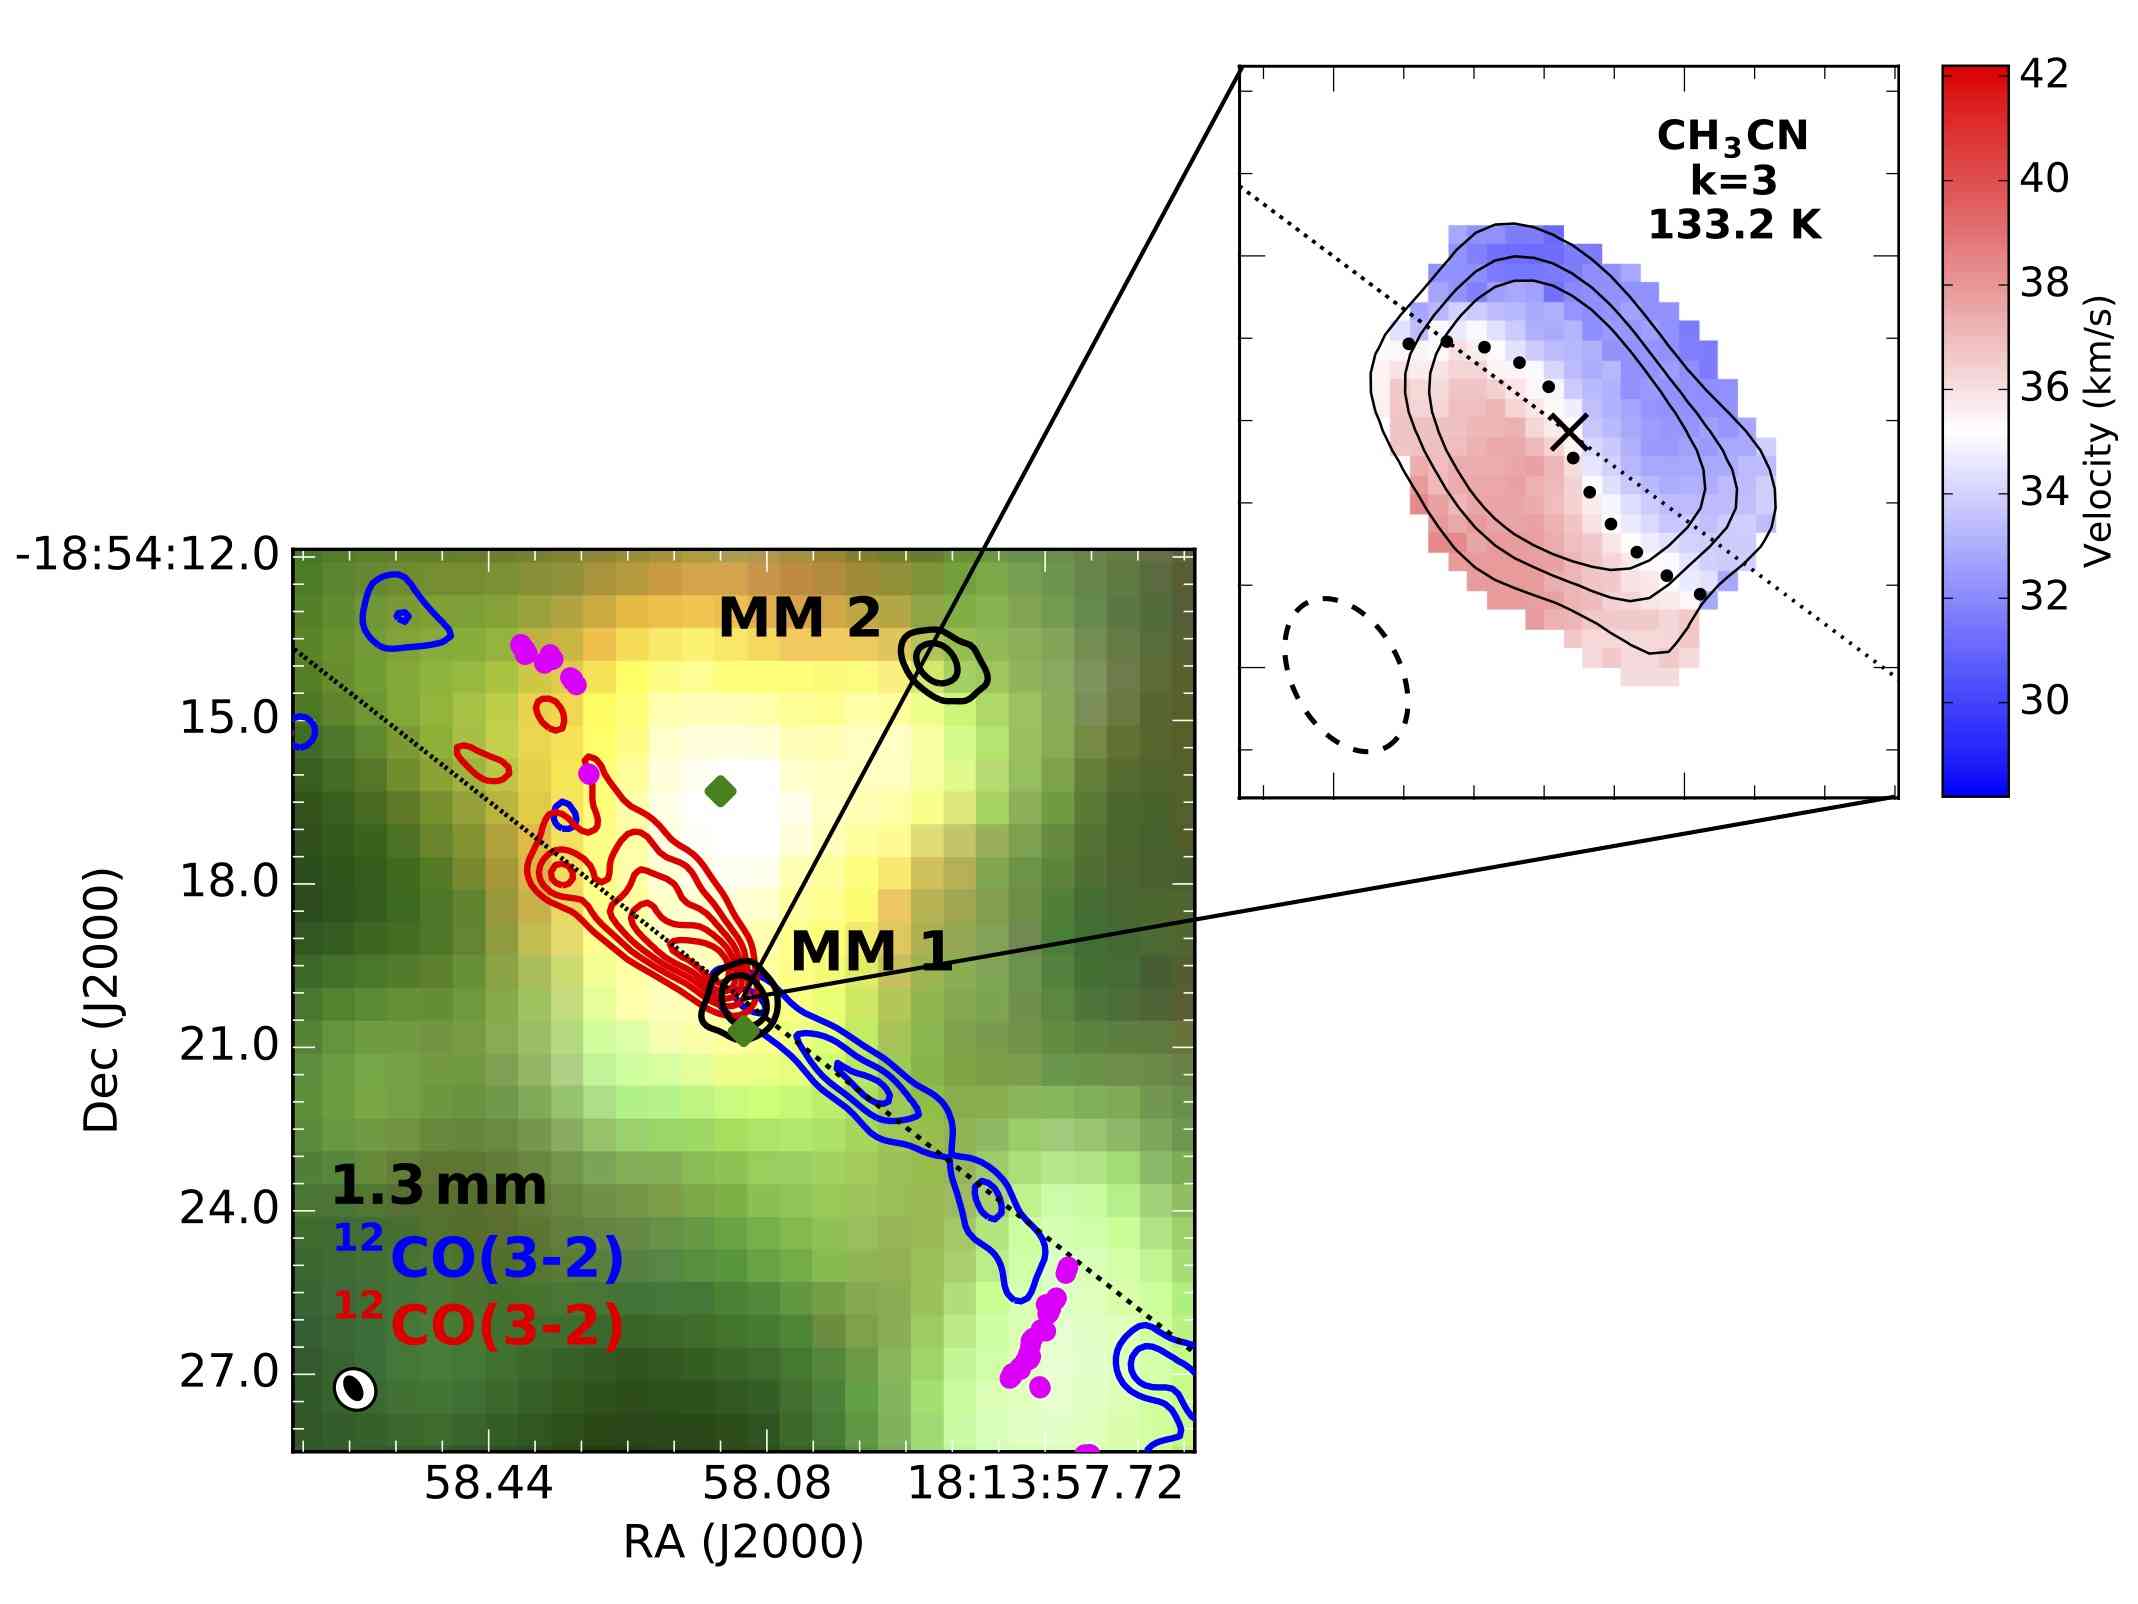 Figure 2: SMA observations of G11.91-0.61 MM1 showing the bipolar molecular outflow, and the gas velocity from the CH3CN K=3 transition, consistent with infall and a rotating Keplerian disc (Ilee et al. 2016).